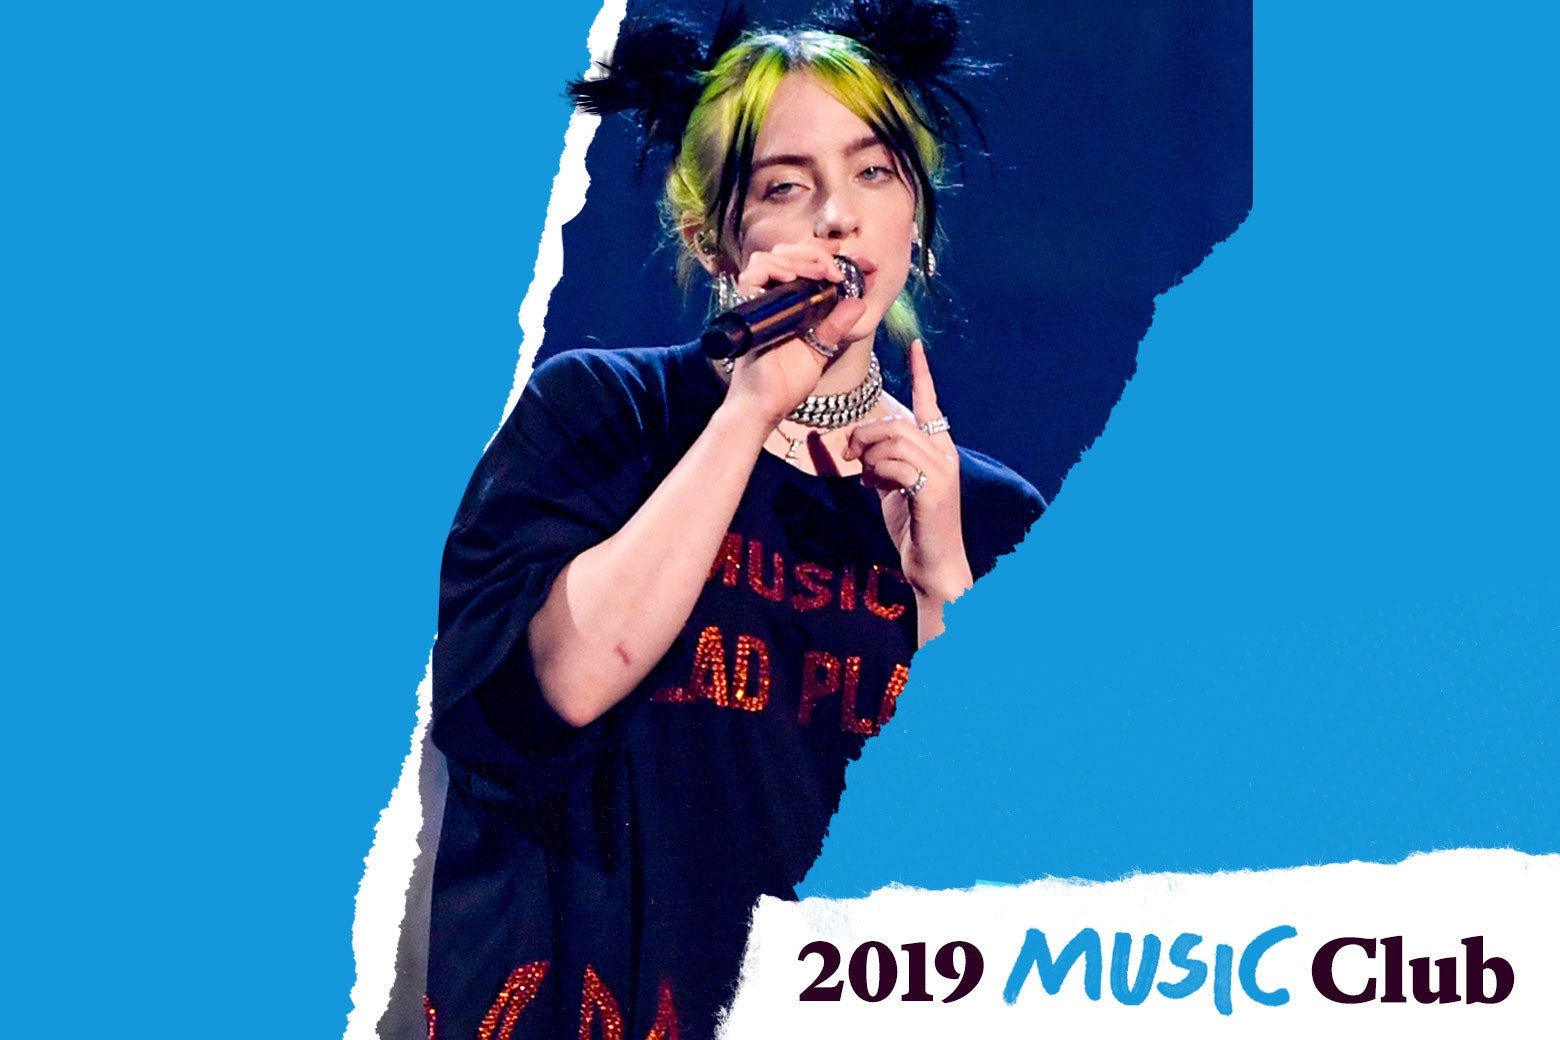 Billie Eilish performs in a shirt that says NO MUSIC ON A DEAD PLANET in sparkly letters. Text in the corner says 2019 Music Club.